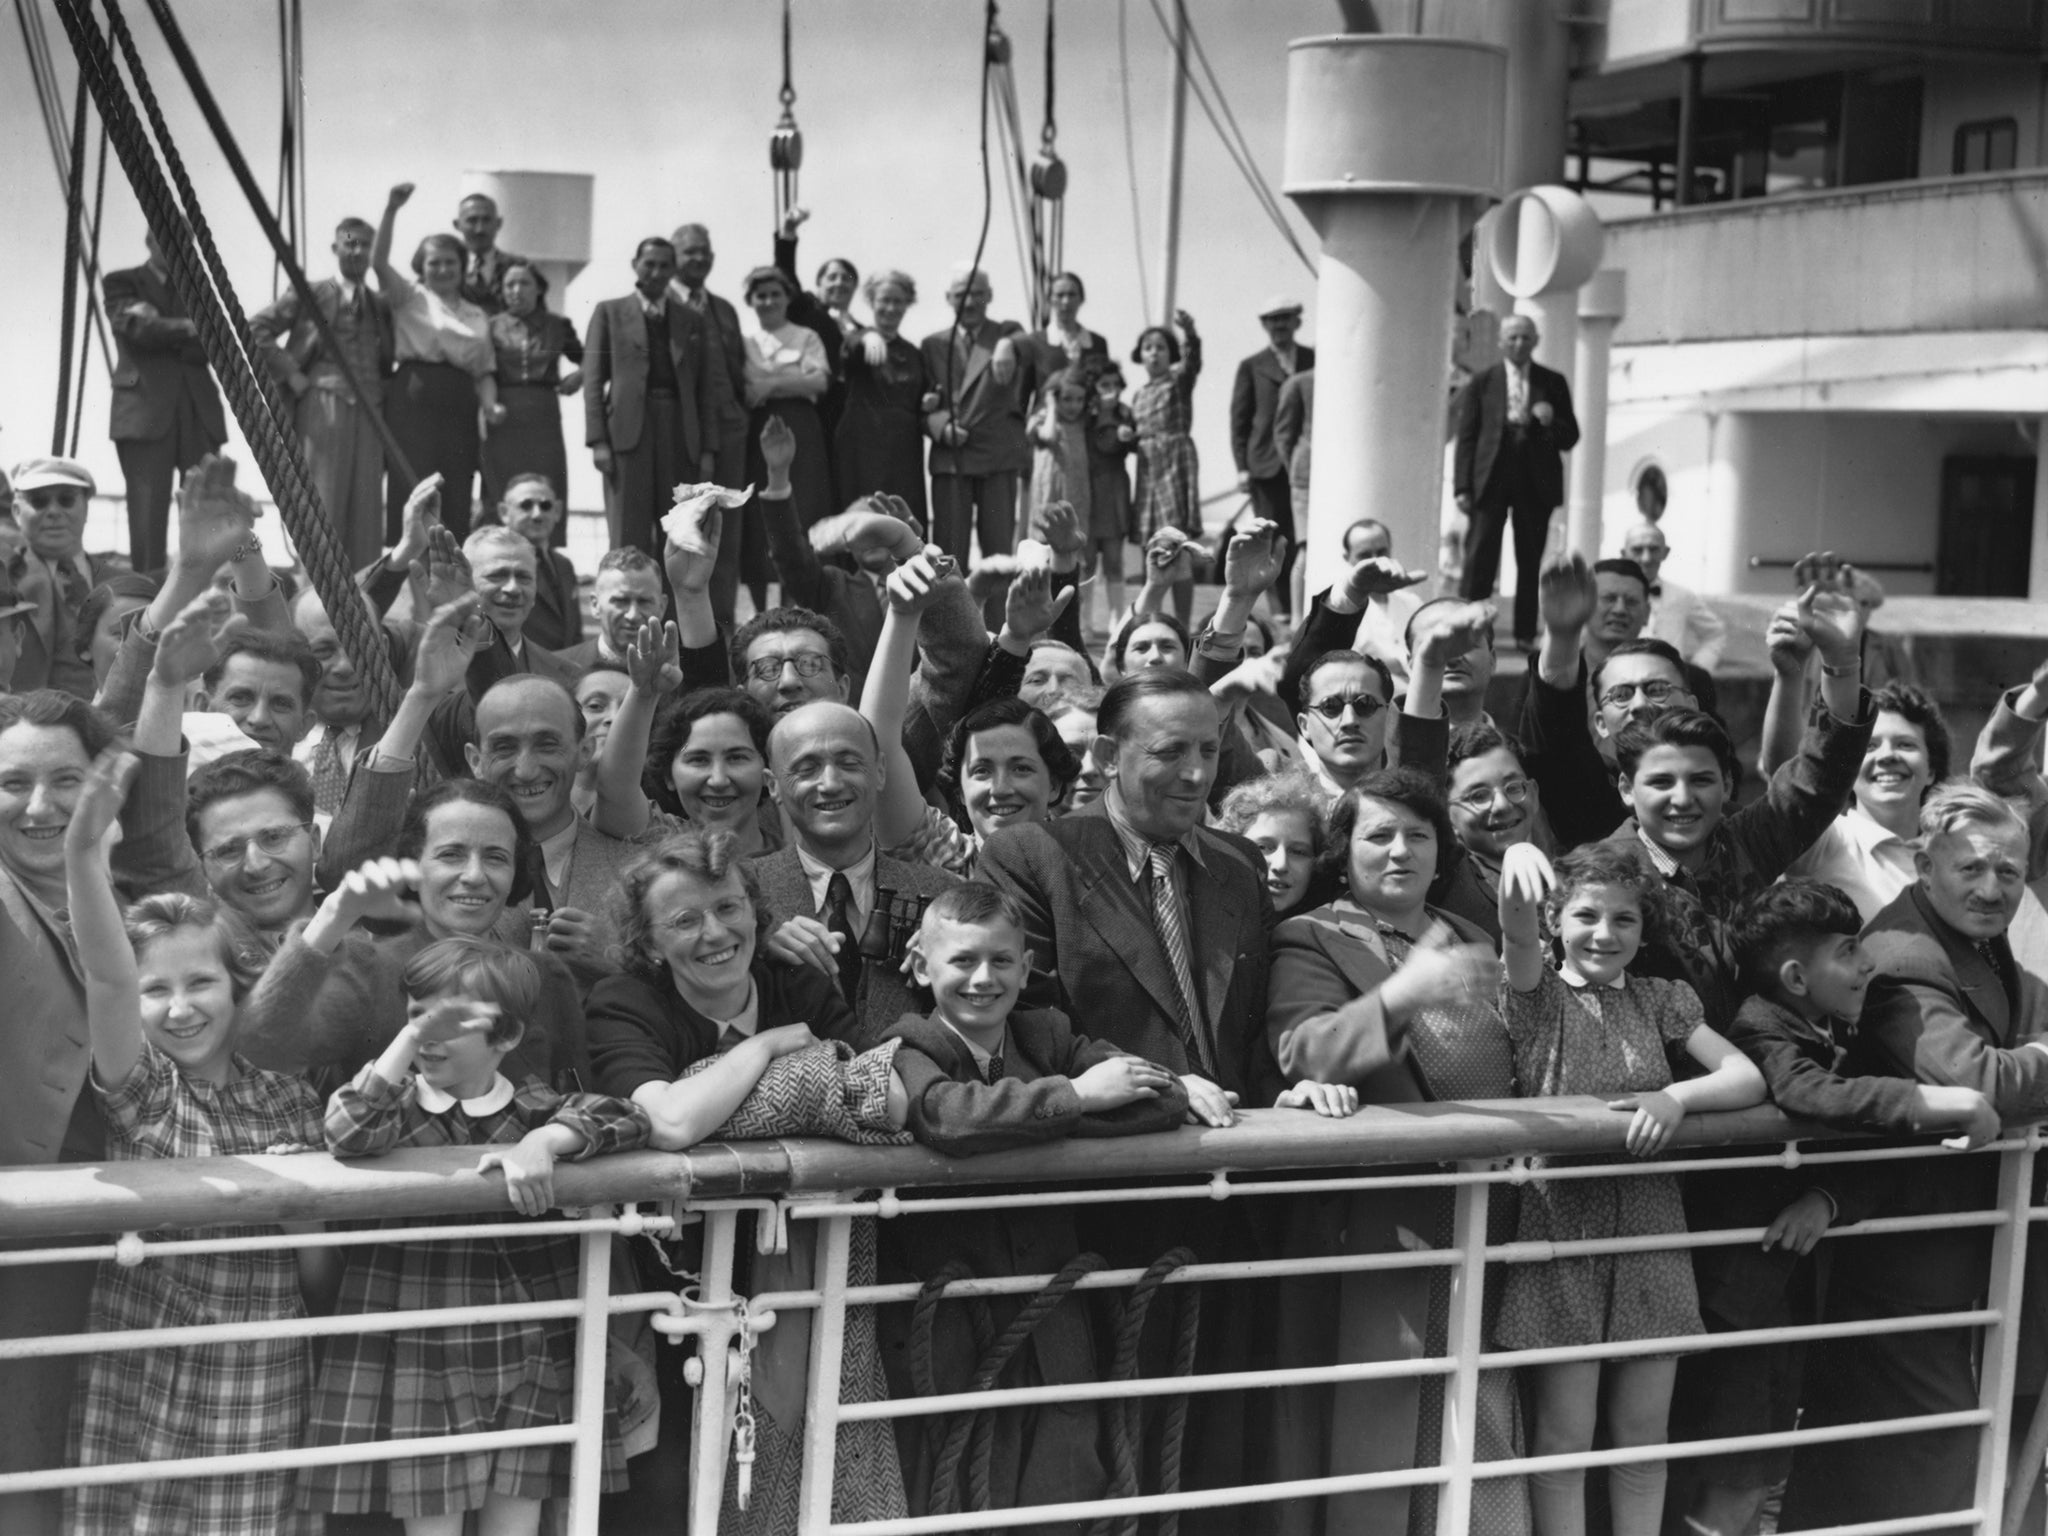 Some of the 700 Jewish refugees aboard Hamburg-America liner St Louis in 1939